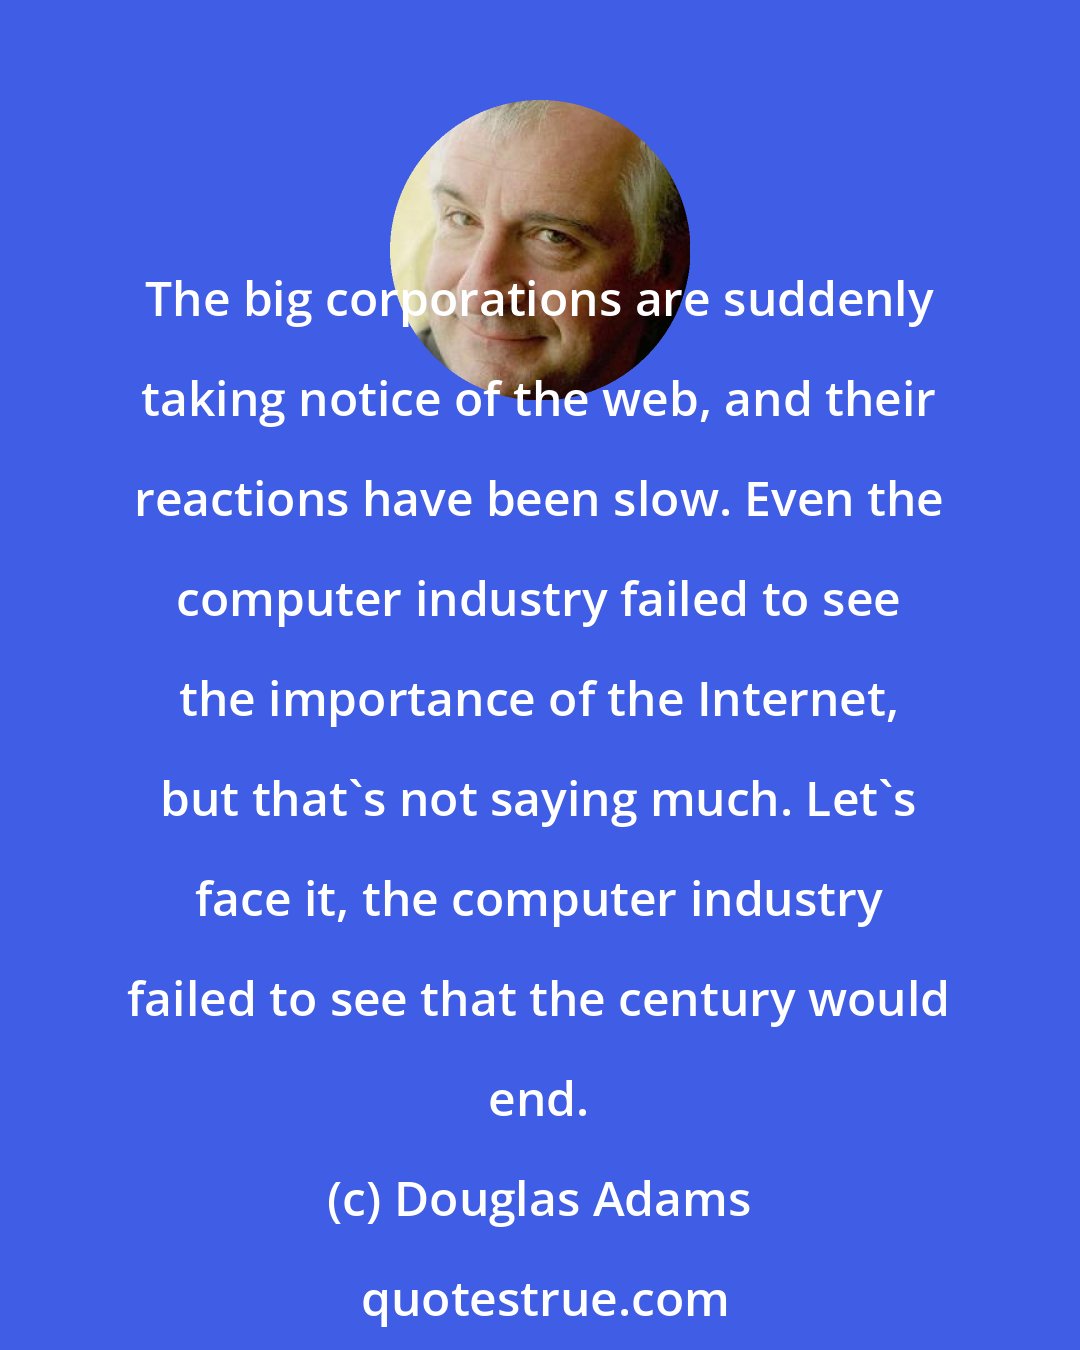 Douglas Adams: The big corporations are suddenly taking notice of the web, and their reactions have been slow. Even the computer industry failed to see the importance of the Internet, but that's not saying much. Let's face it, the computer industry failed to see that the century would end.